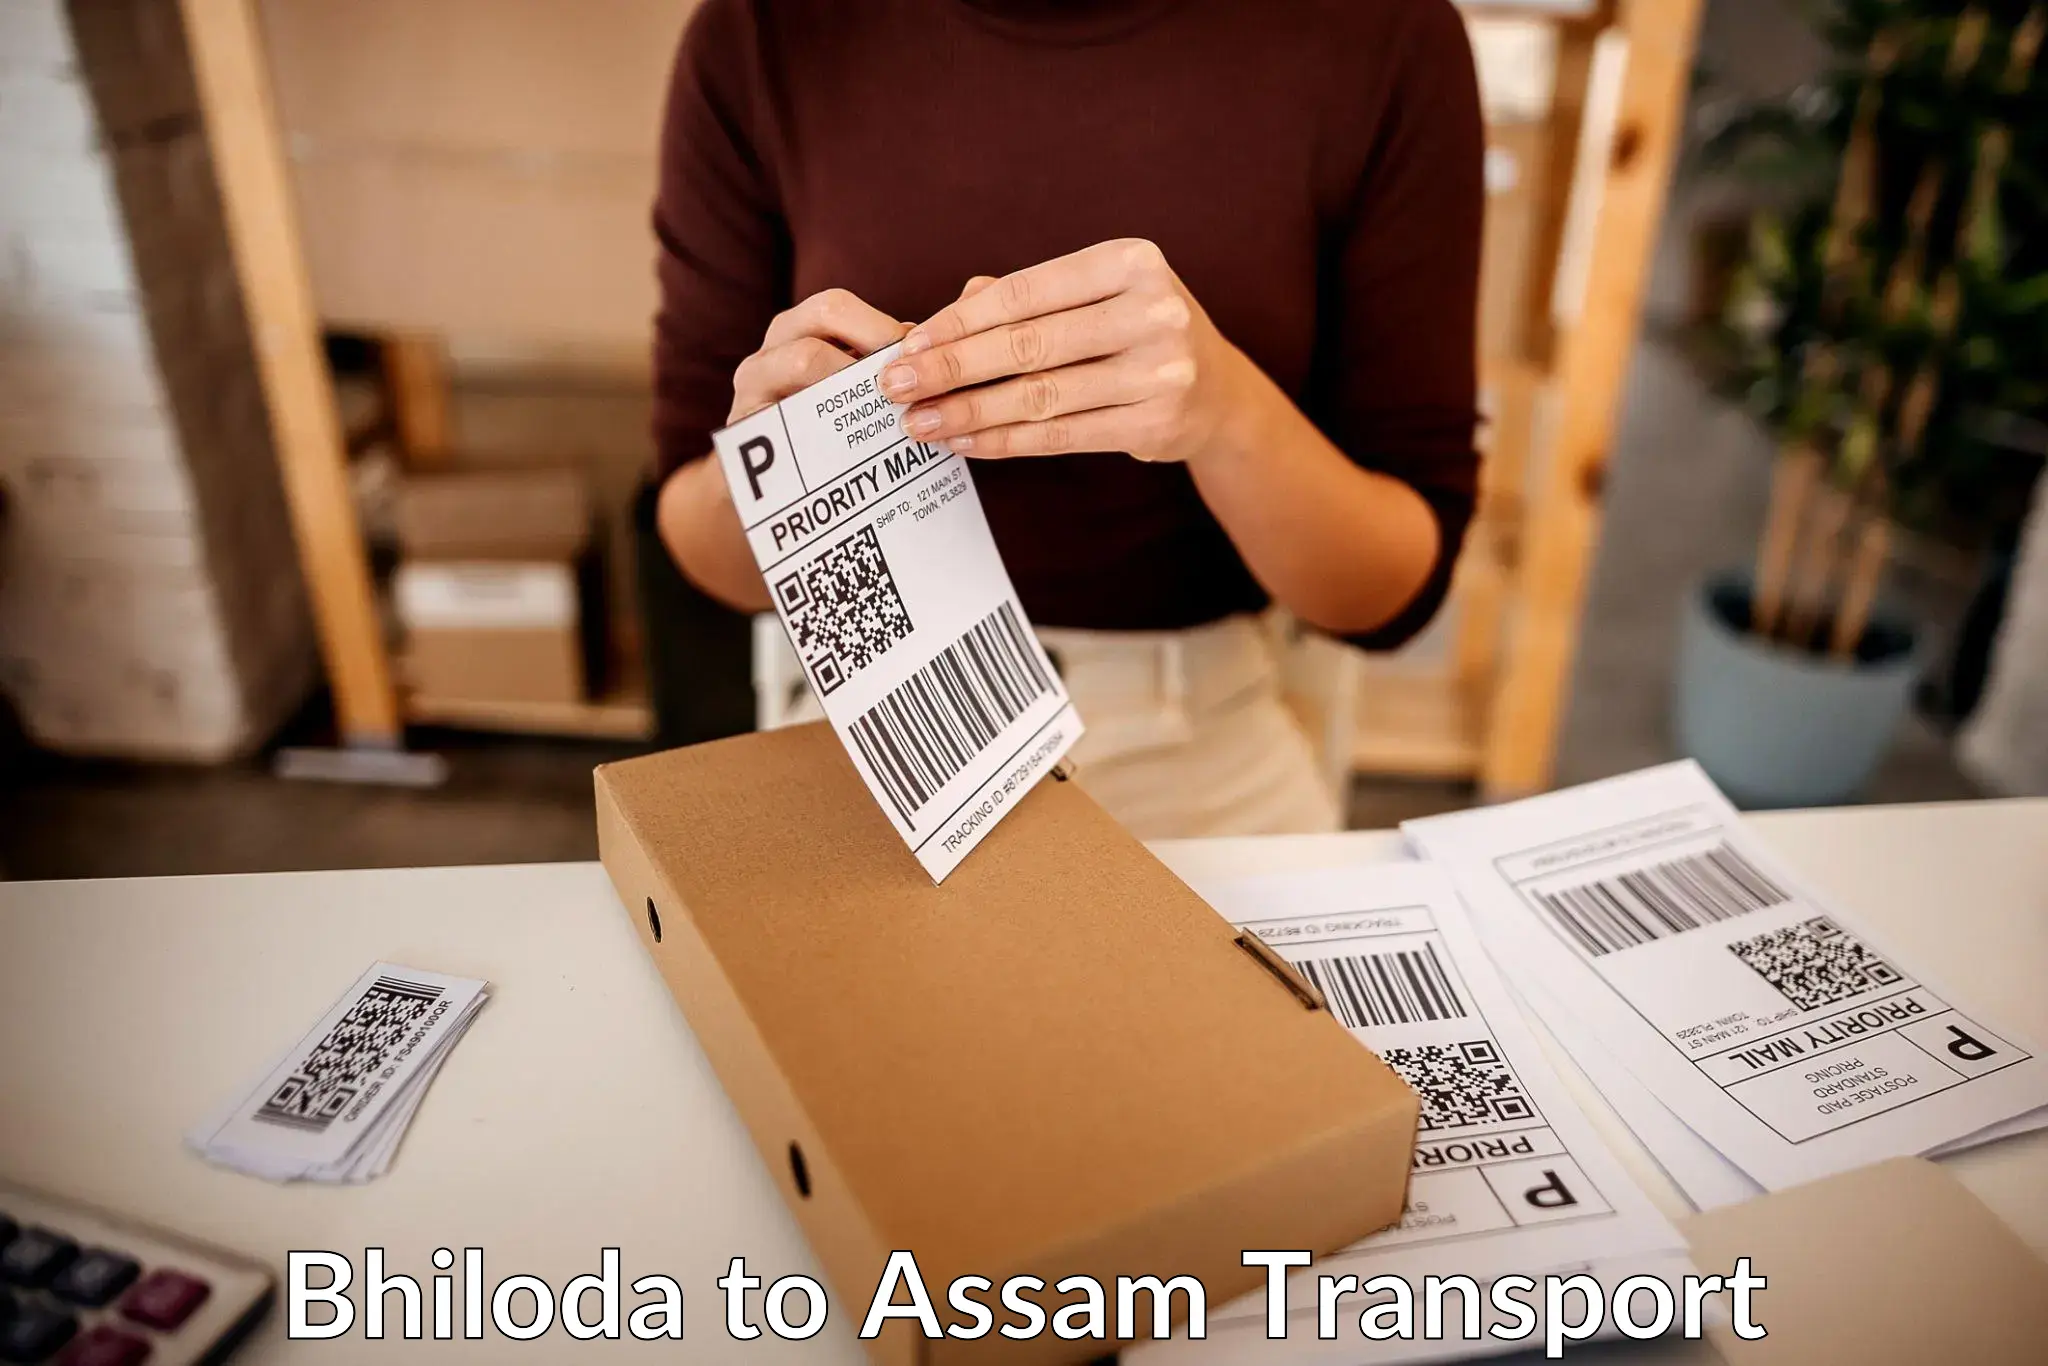 Nationwide transport services Bhiloda to Assam